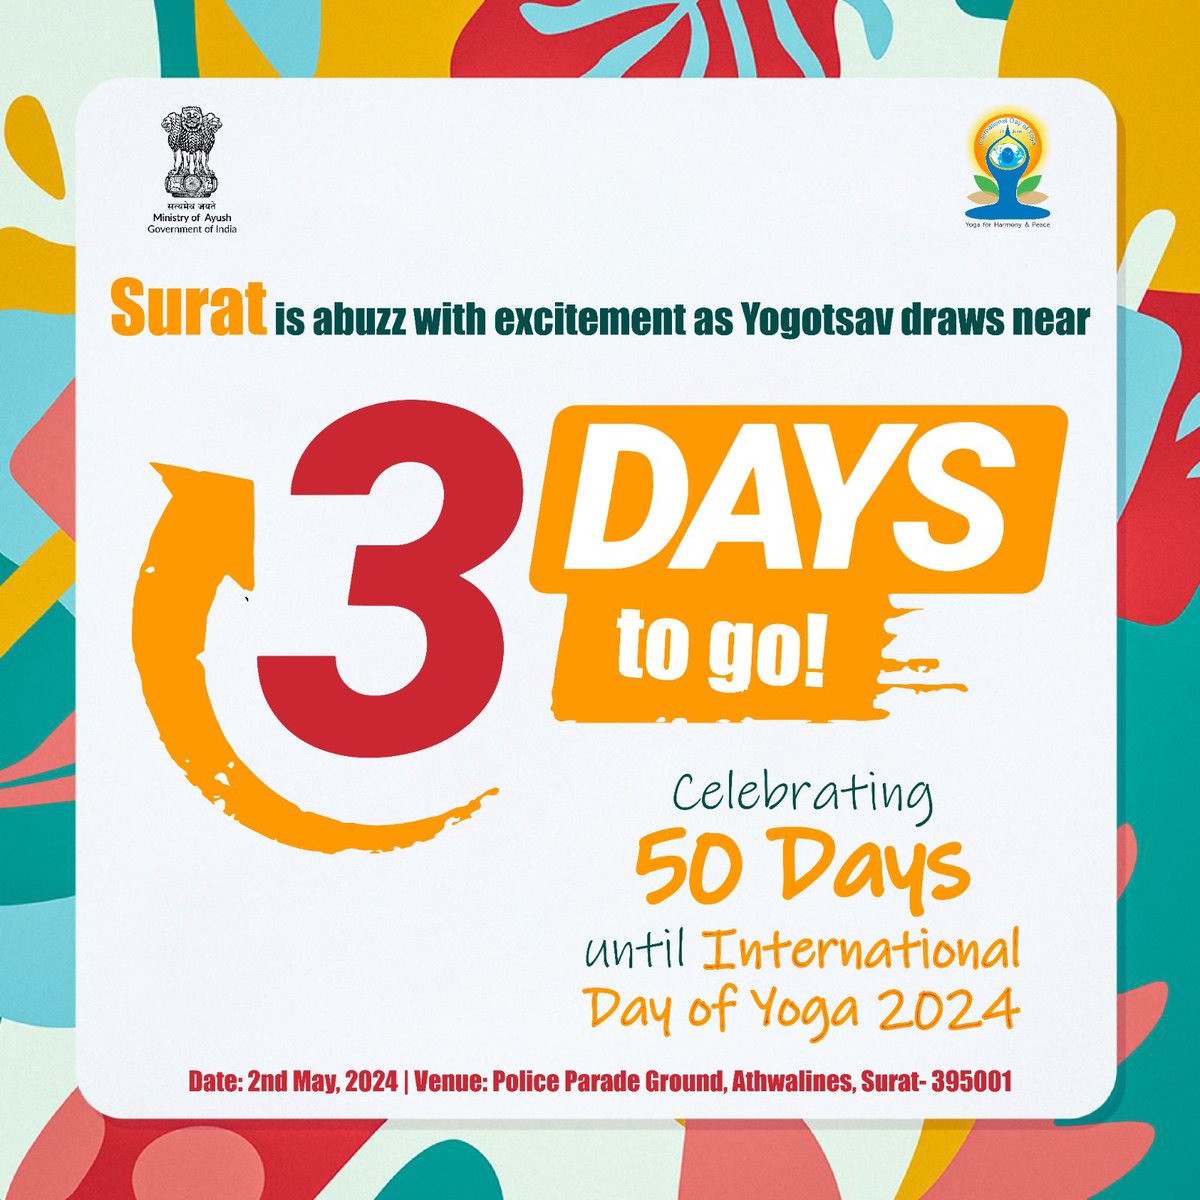 With just 3 days to go, Surat is buzzing with excitement as Yogotsav approaches. This celebration marks the countdown to the 50th day of International Day of Yoga 2024, with Surat gearing up for a grand event on 2nd May. 
#Yogotsav2024 #IDY2024 #InternationalDayOfYoga2024